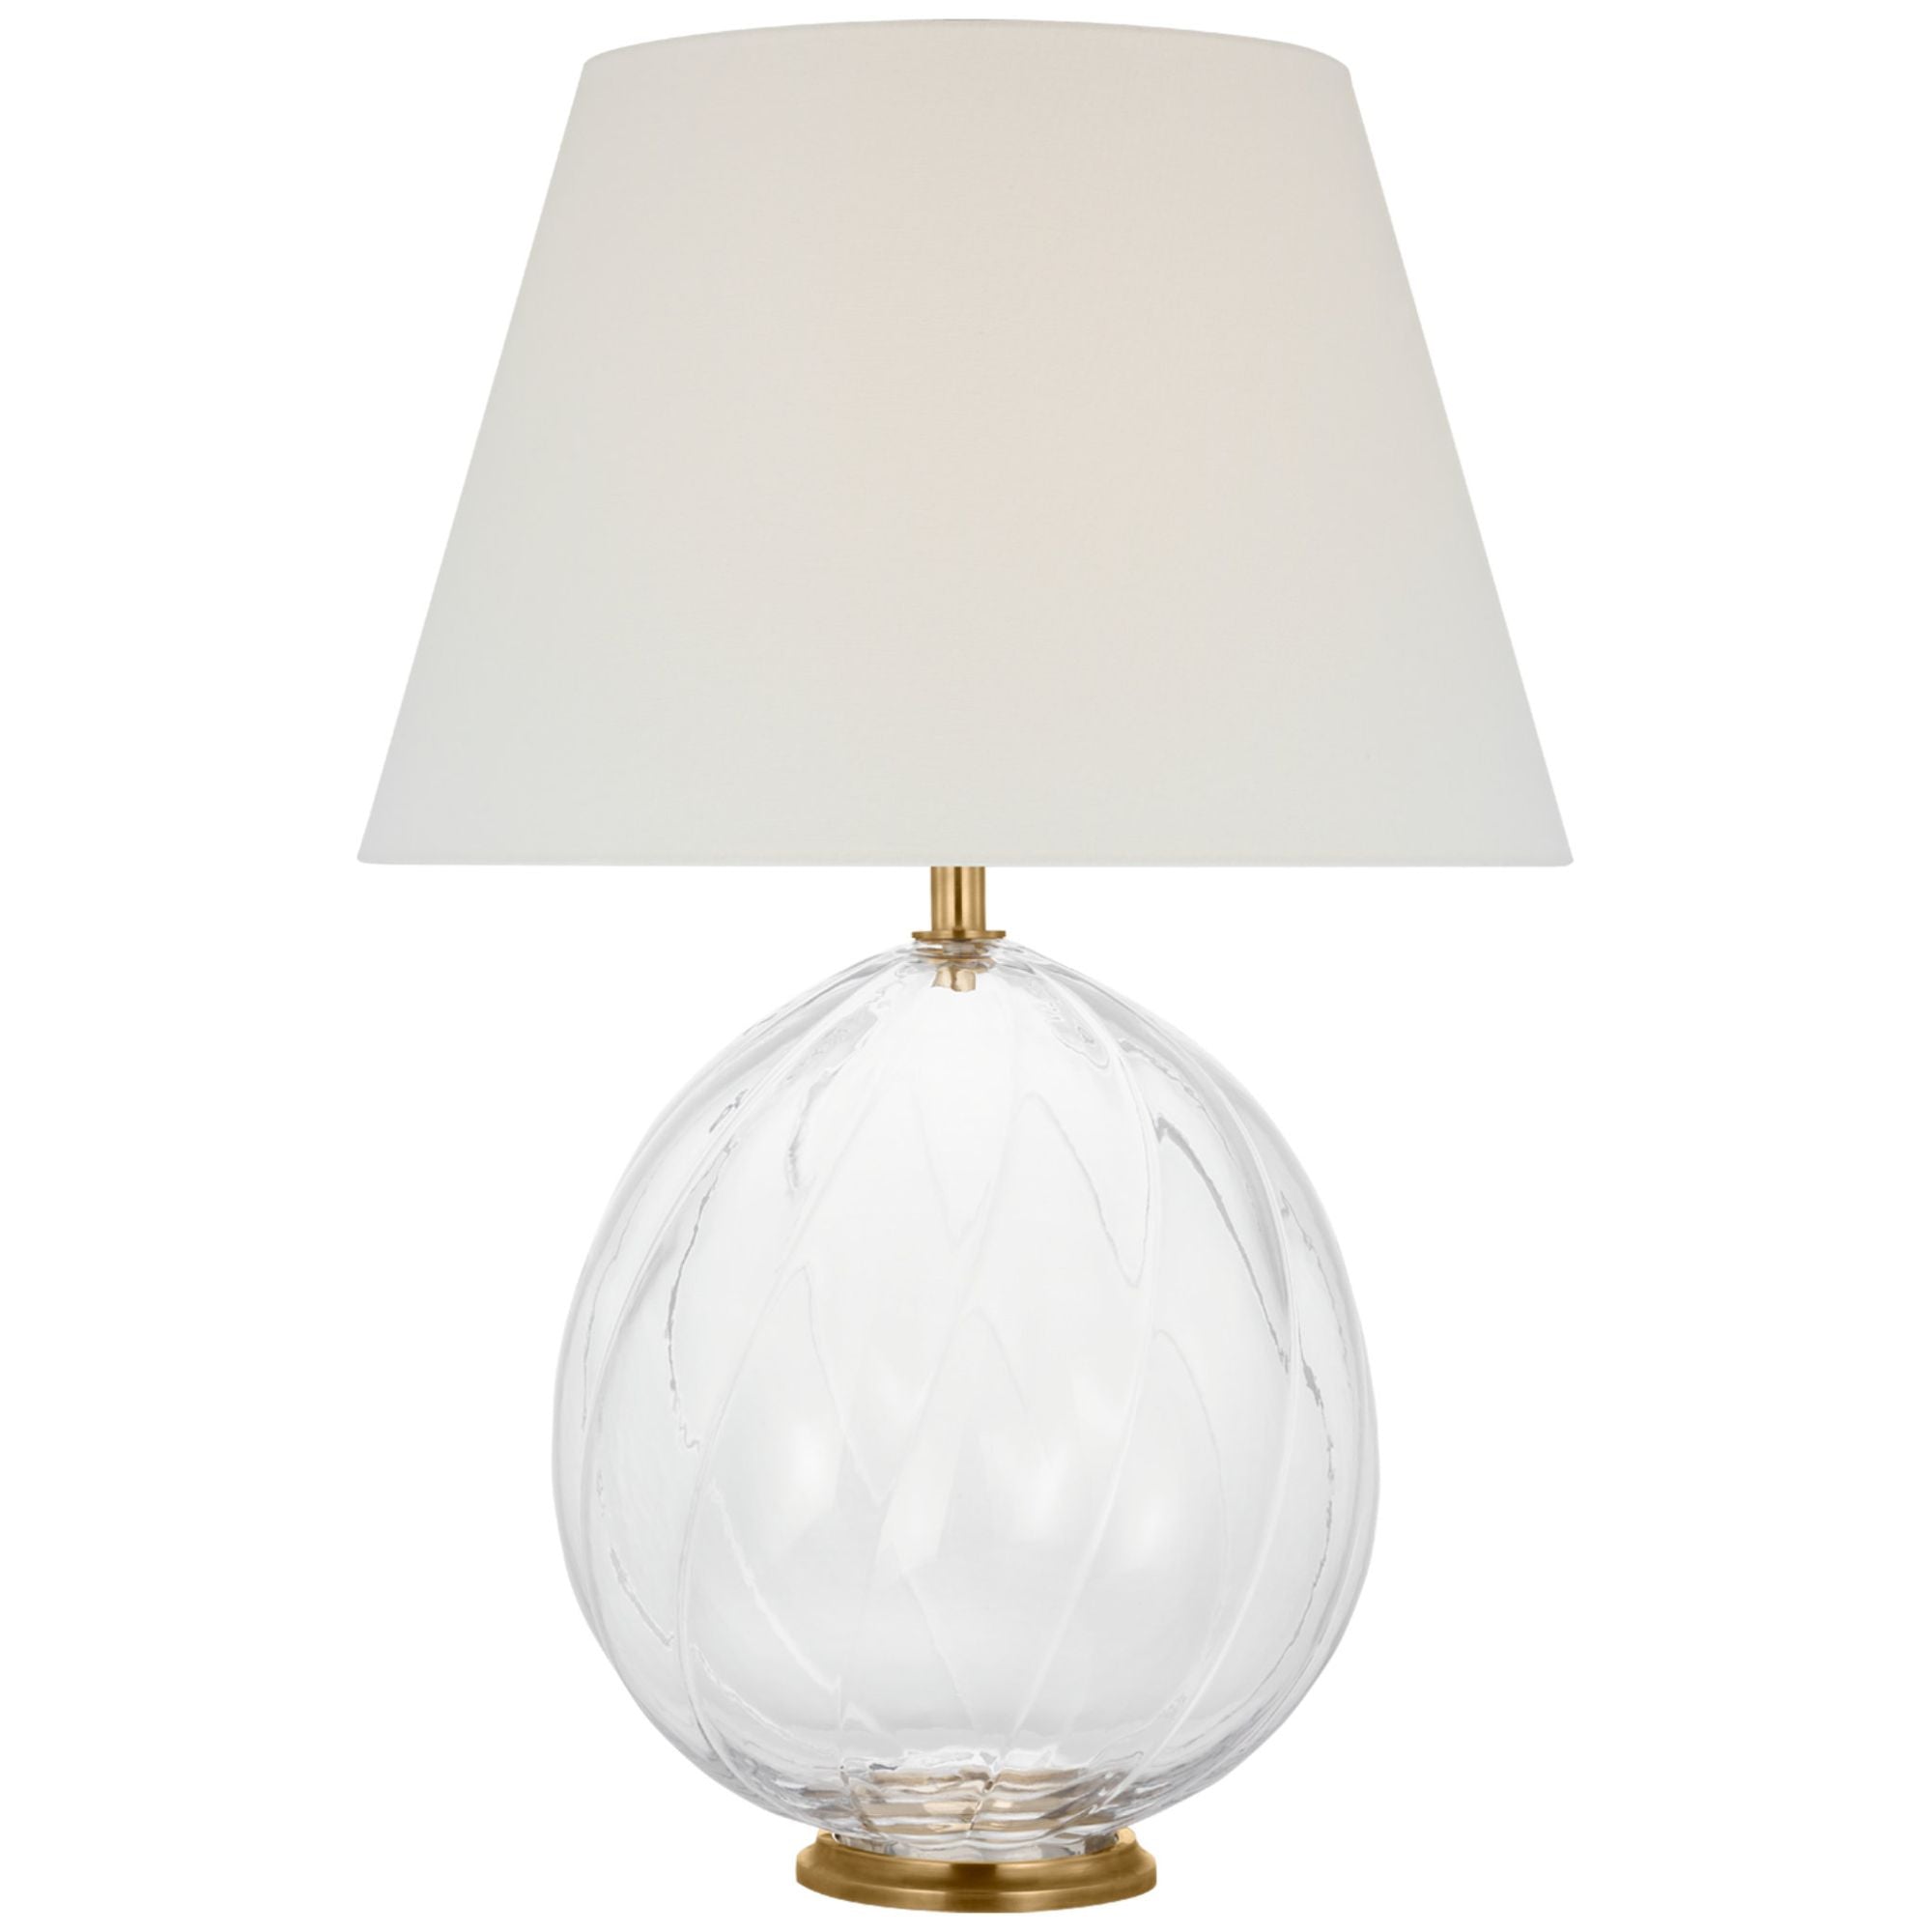 Julie Neill Talia Medium Table Lamp in Clear Glass with Linen Shade